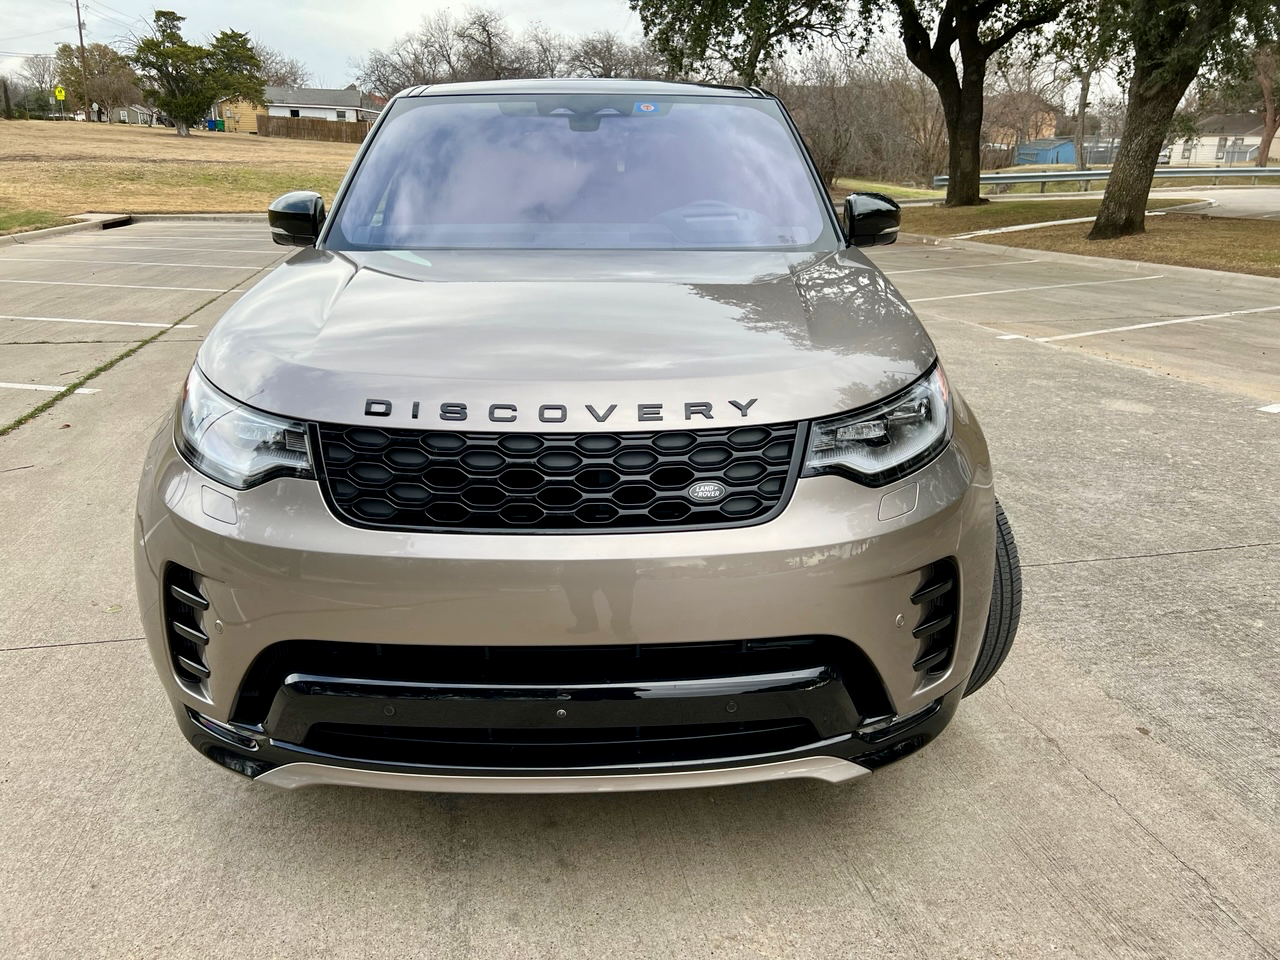 Lima leider duisternis 2021 Land Rover Discovery R-Dynamic Review